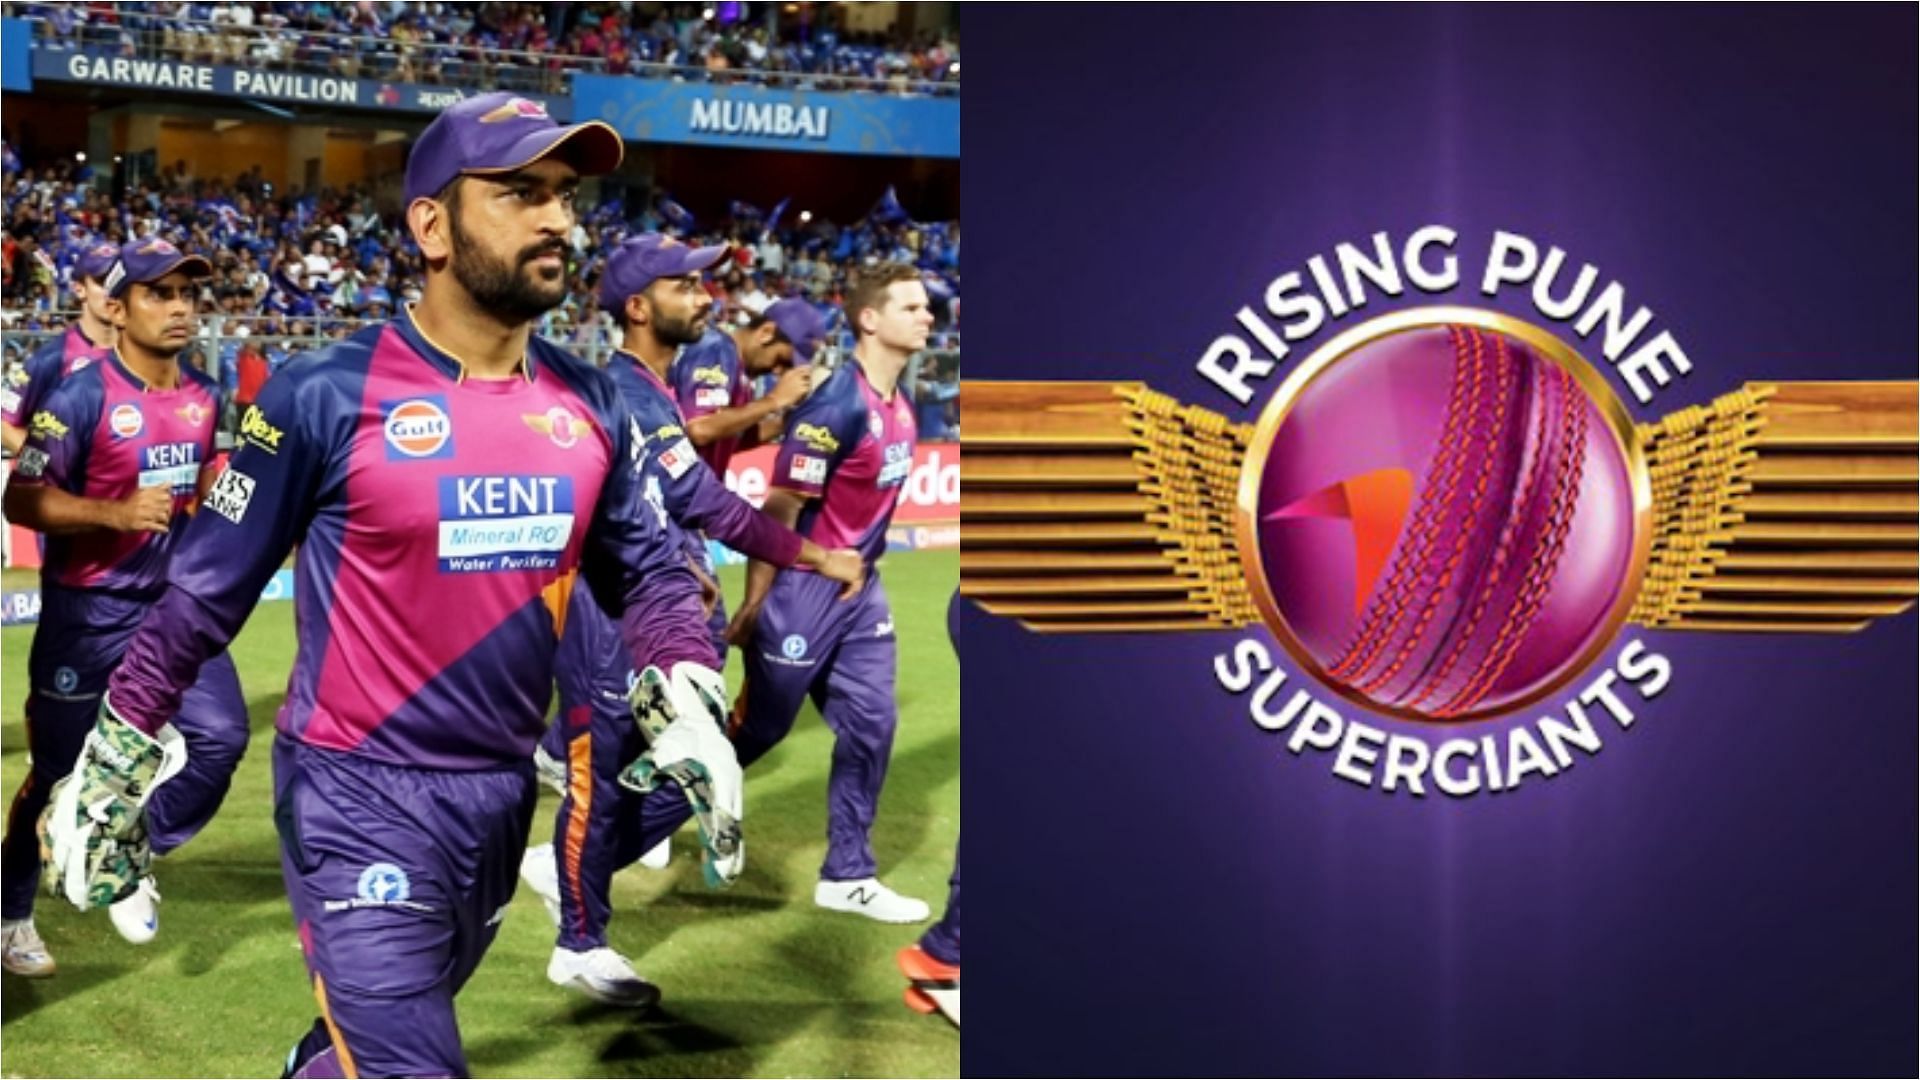 The Rising Pune Supergiant played two editions of the IPL in 2016 and 2017